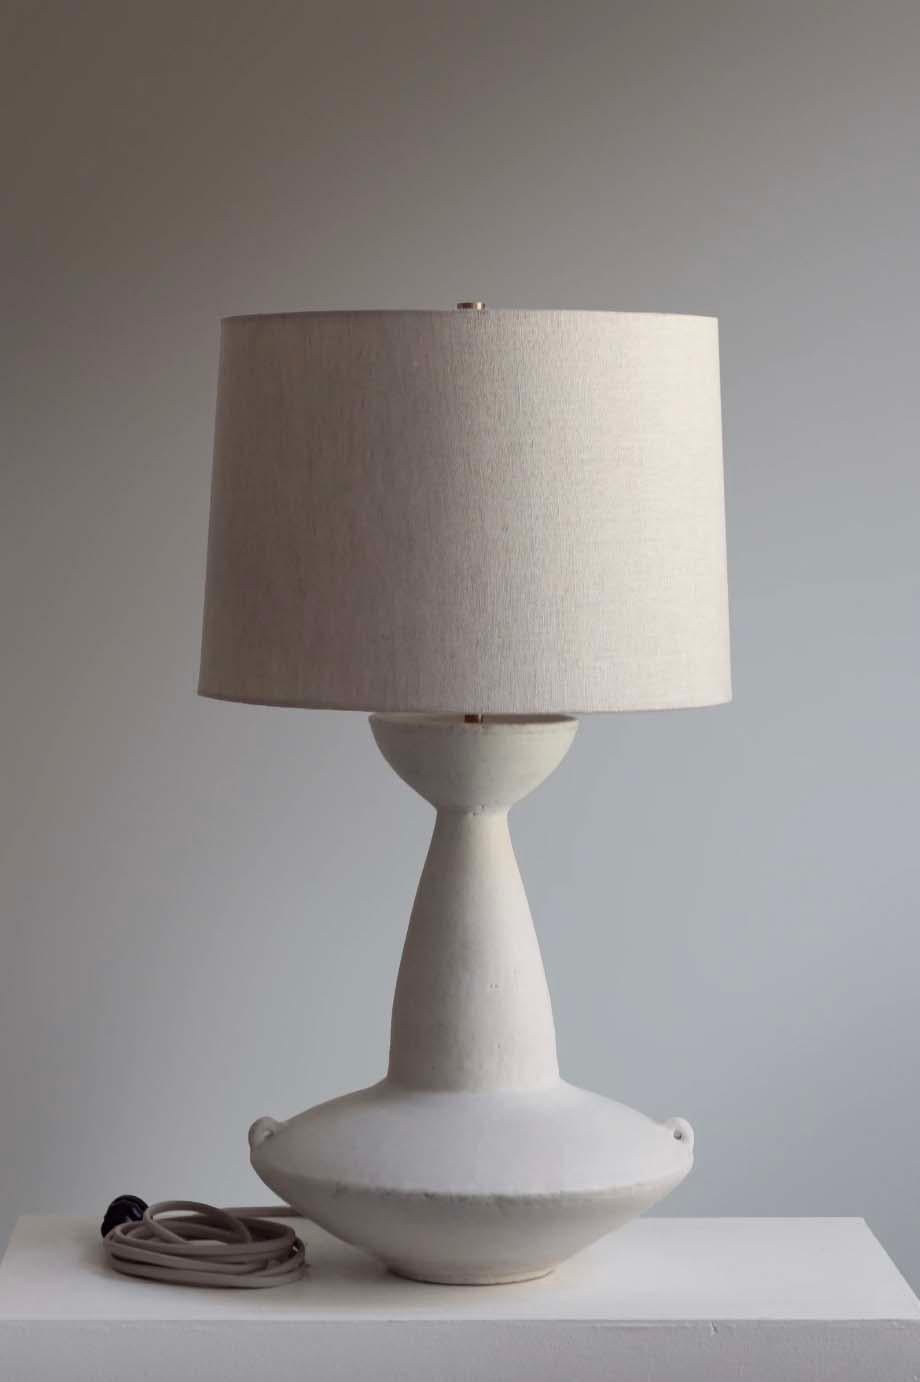 The Claudius lamp is handmade studio pottery by ceramic artist by Danny Kaplan. Shade included. Please note exact dimensions may vary.

Born in New York City and raised in Aix-en-Provence, France, Danny Kaplan’s passion for ceramics was shaped by